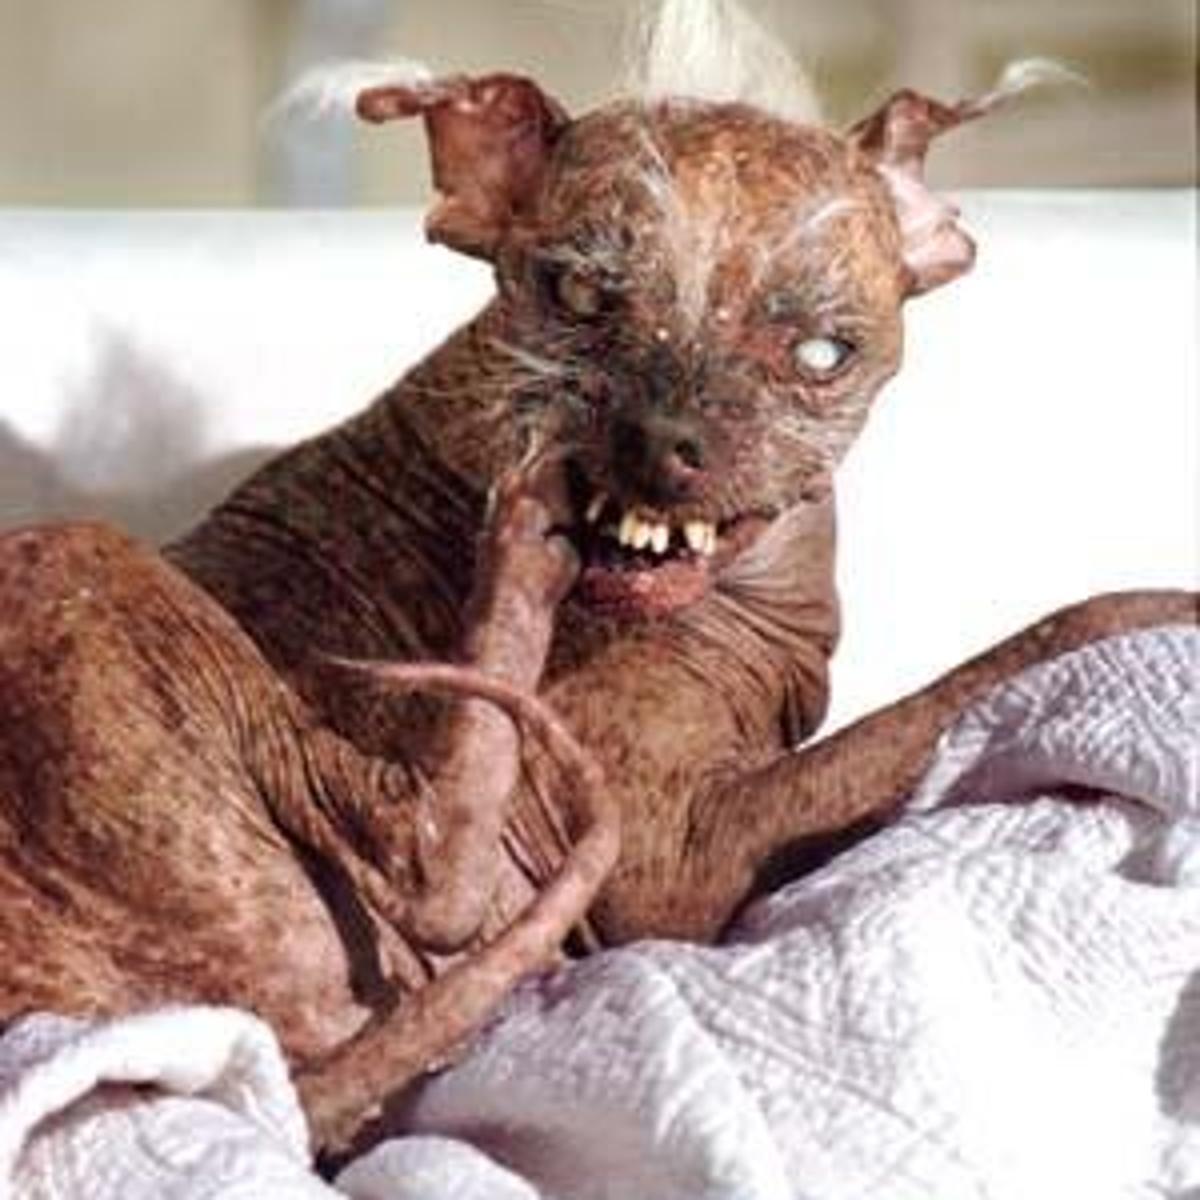 Paws Down Dog Wins Ugly Contest Lifestyles Journaltimes Com